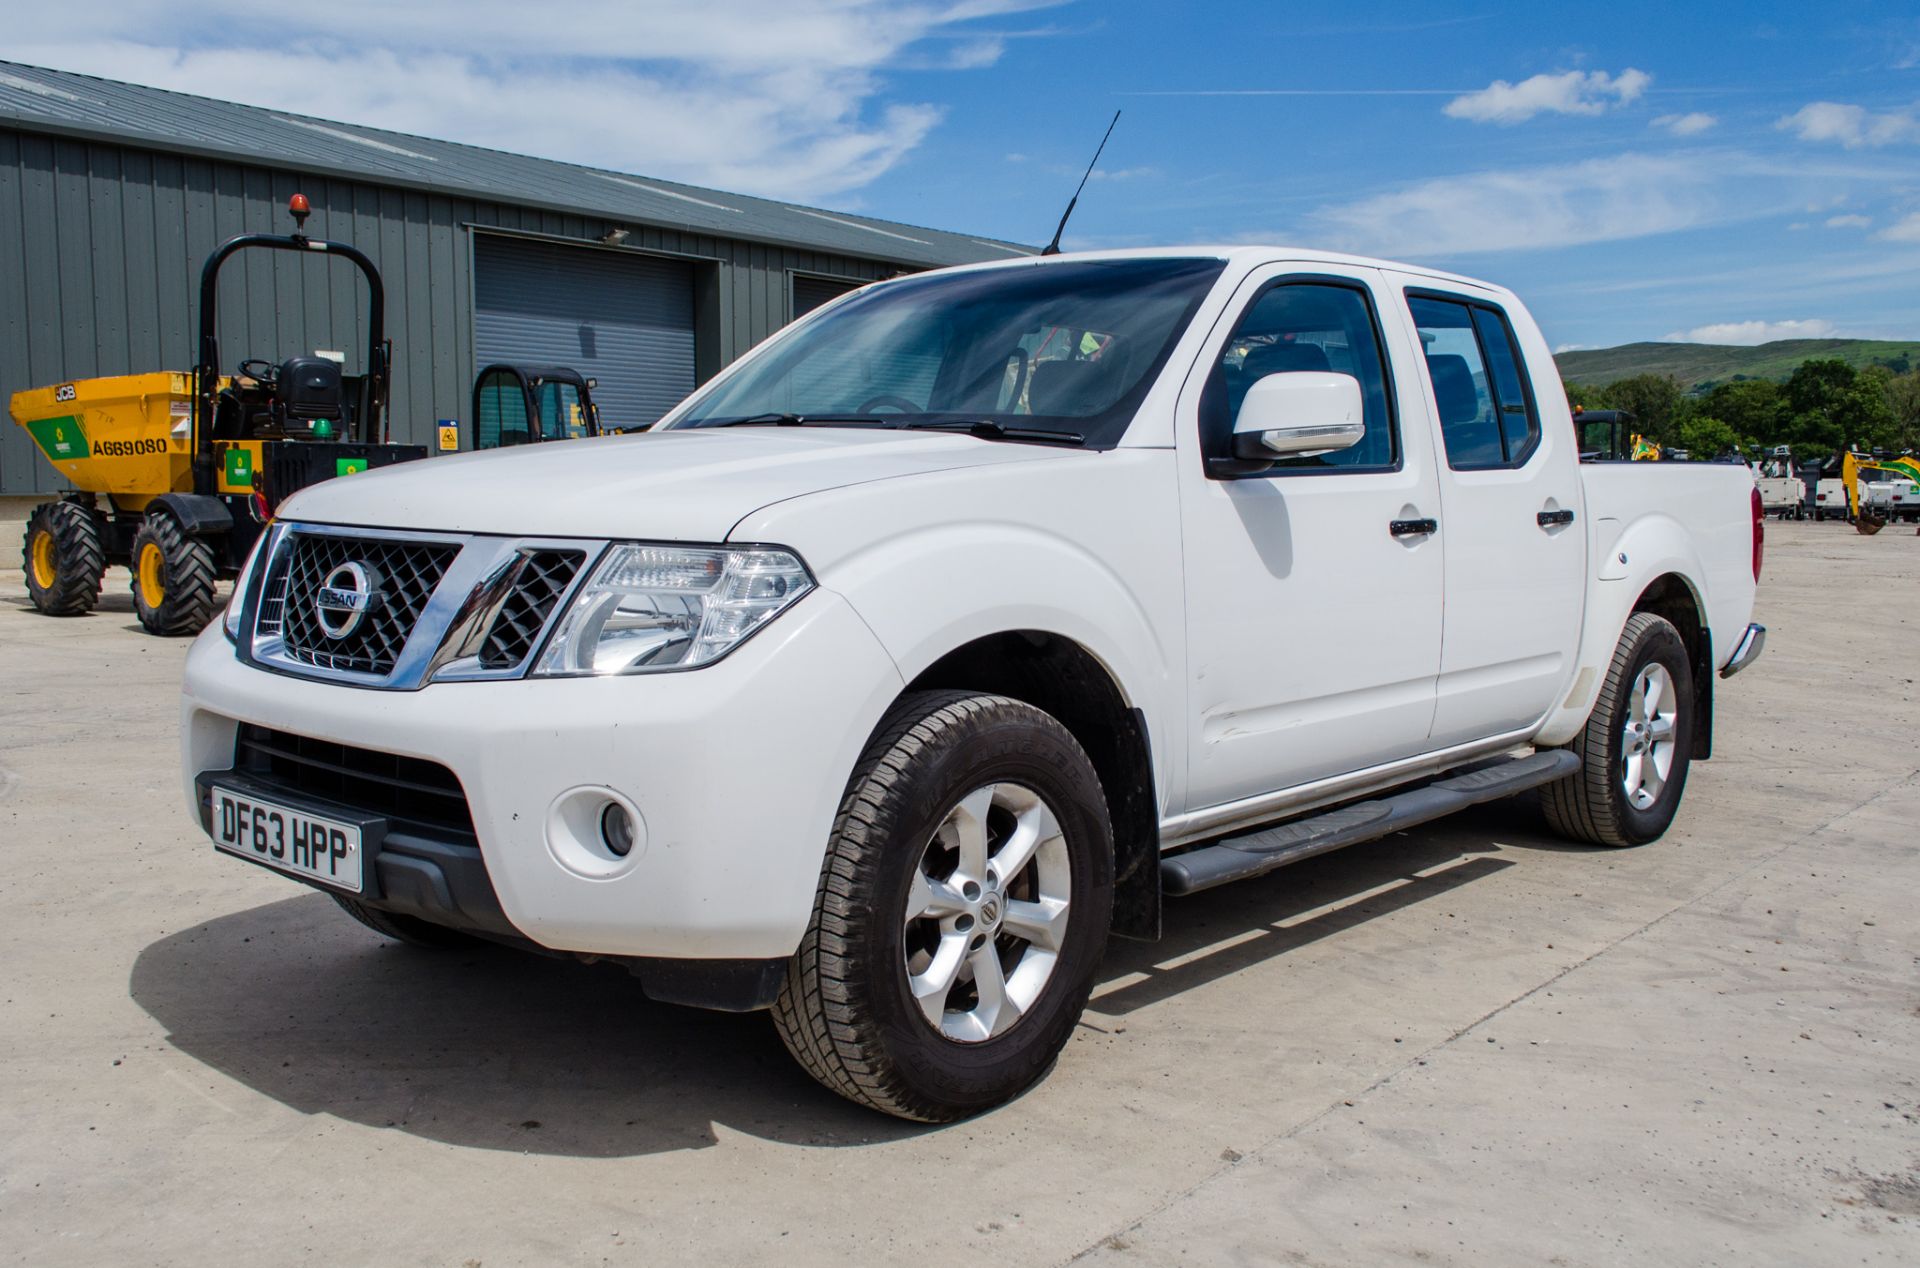 Nissan Navara Acenta DCI 6 speed manual double cab pick up Registration Number: DF63 HPP Date of